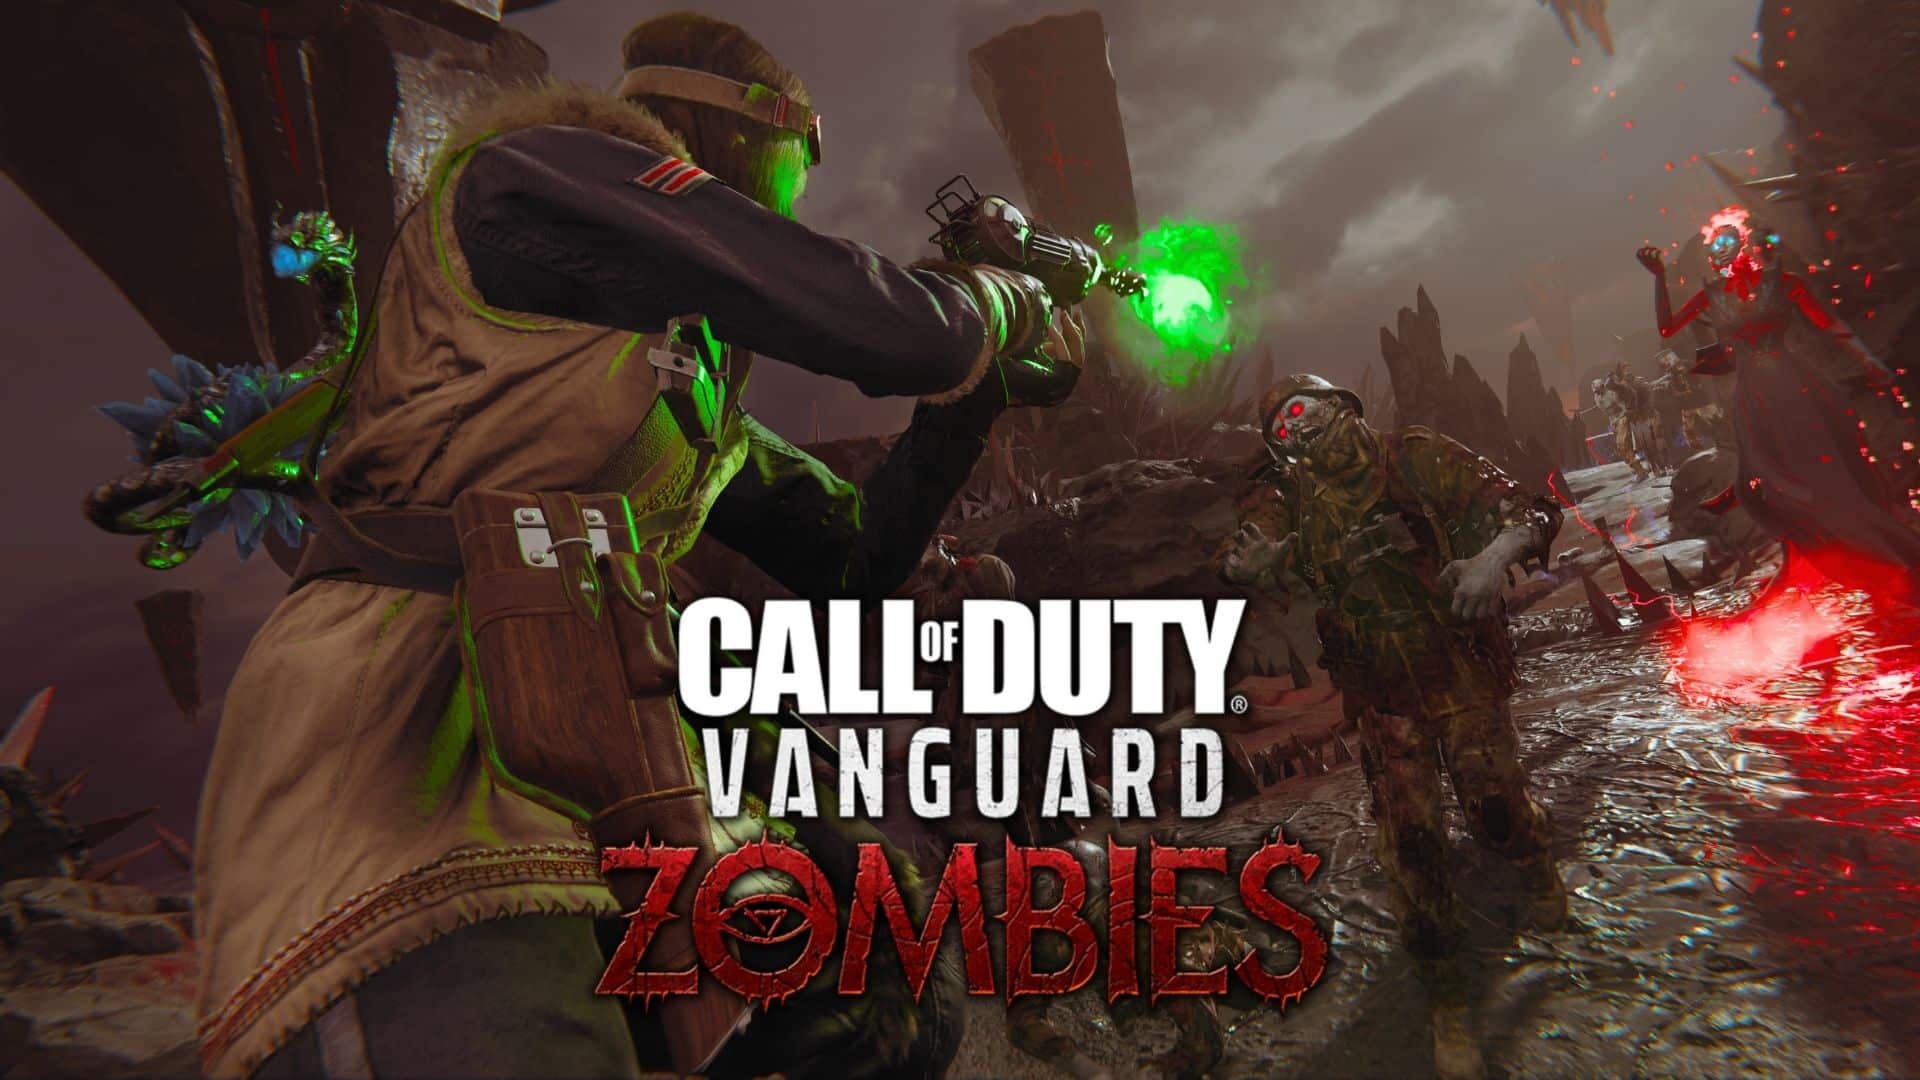 Call of Duty: Vanguard and the secret in Der Anfang in Zombies Mode